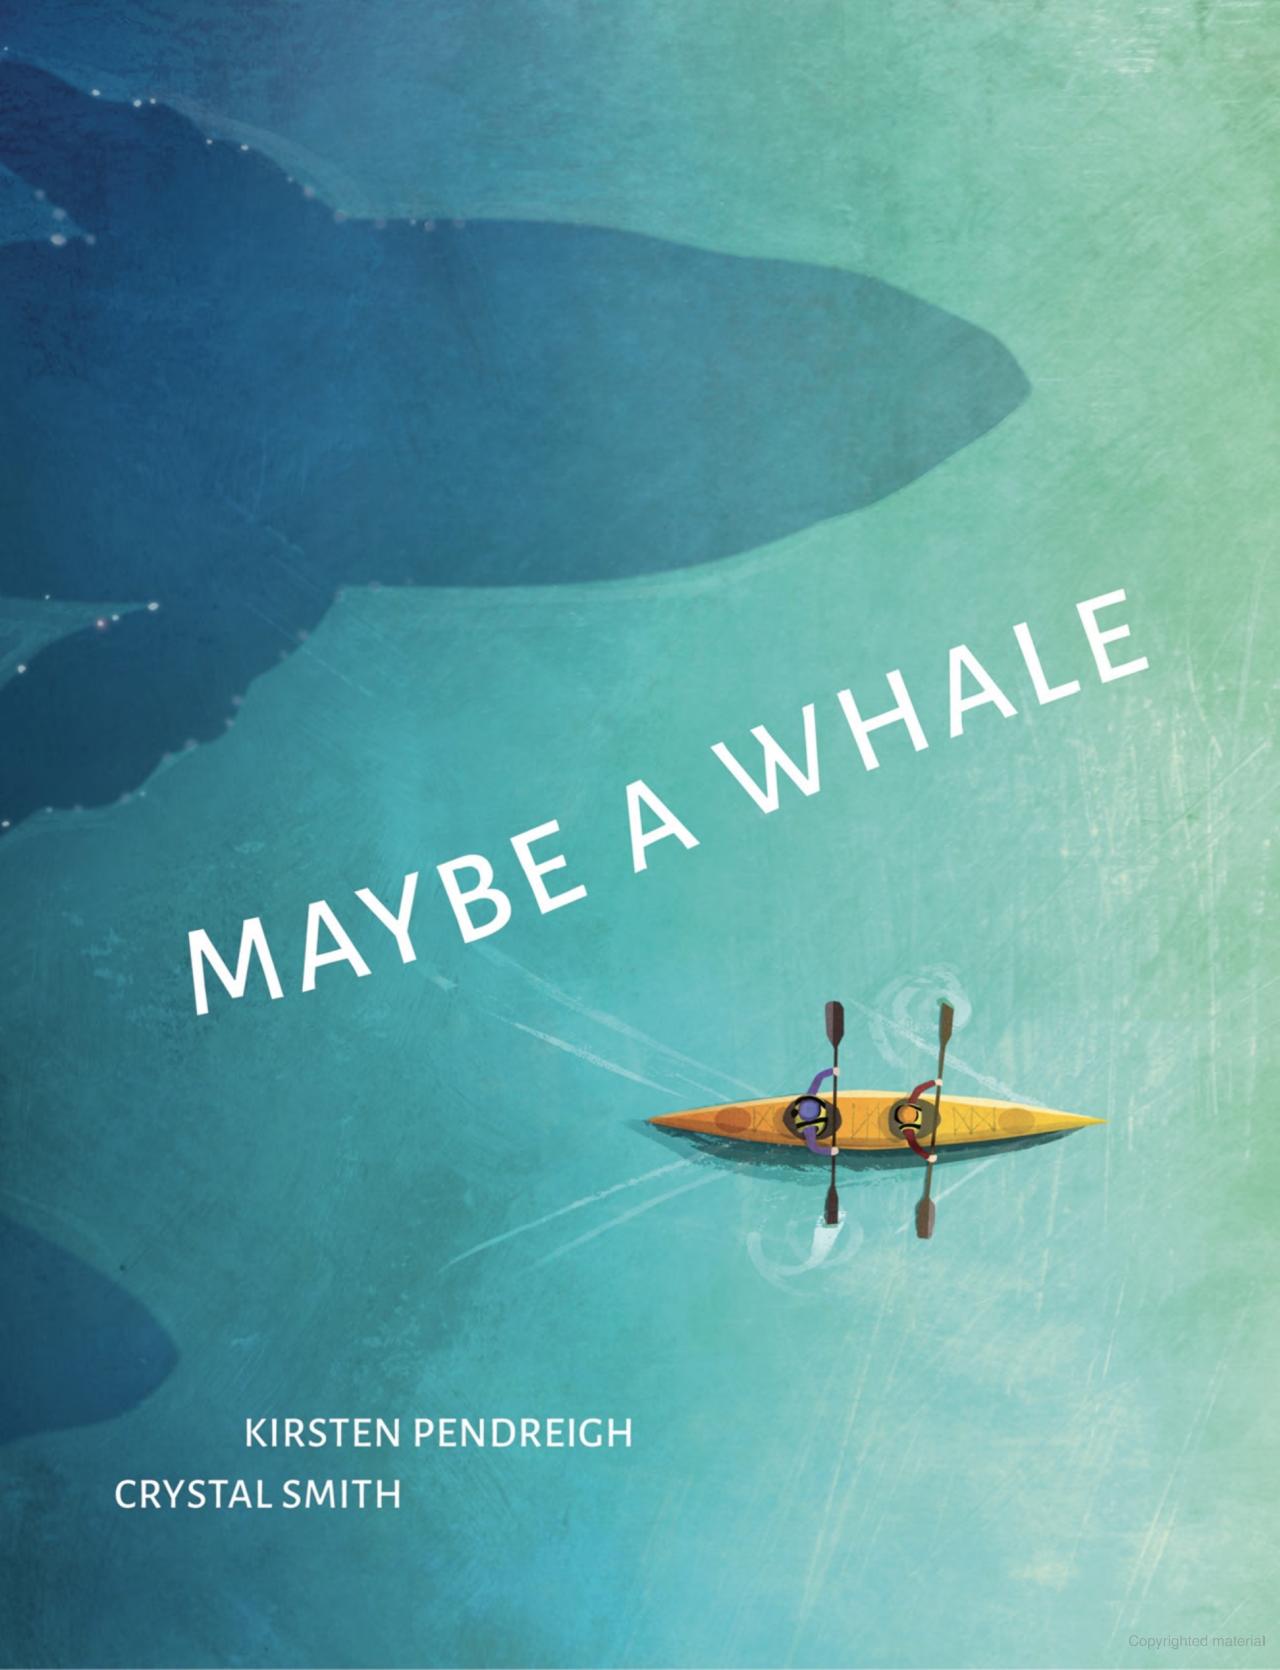 Book cover art for Maybe a Whale.